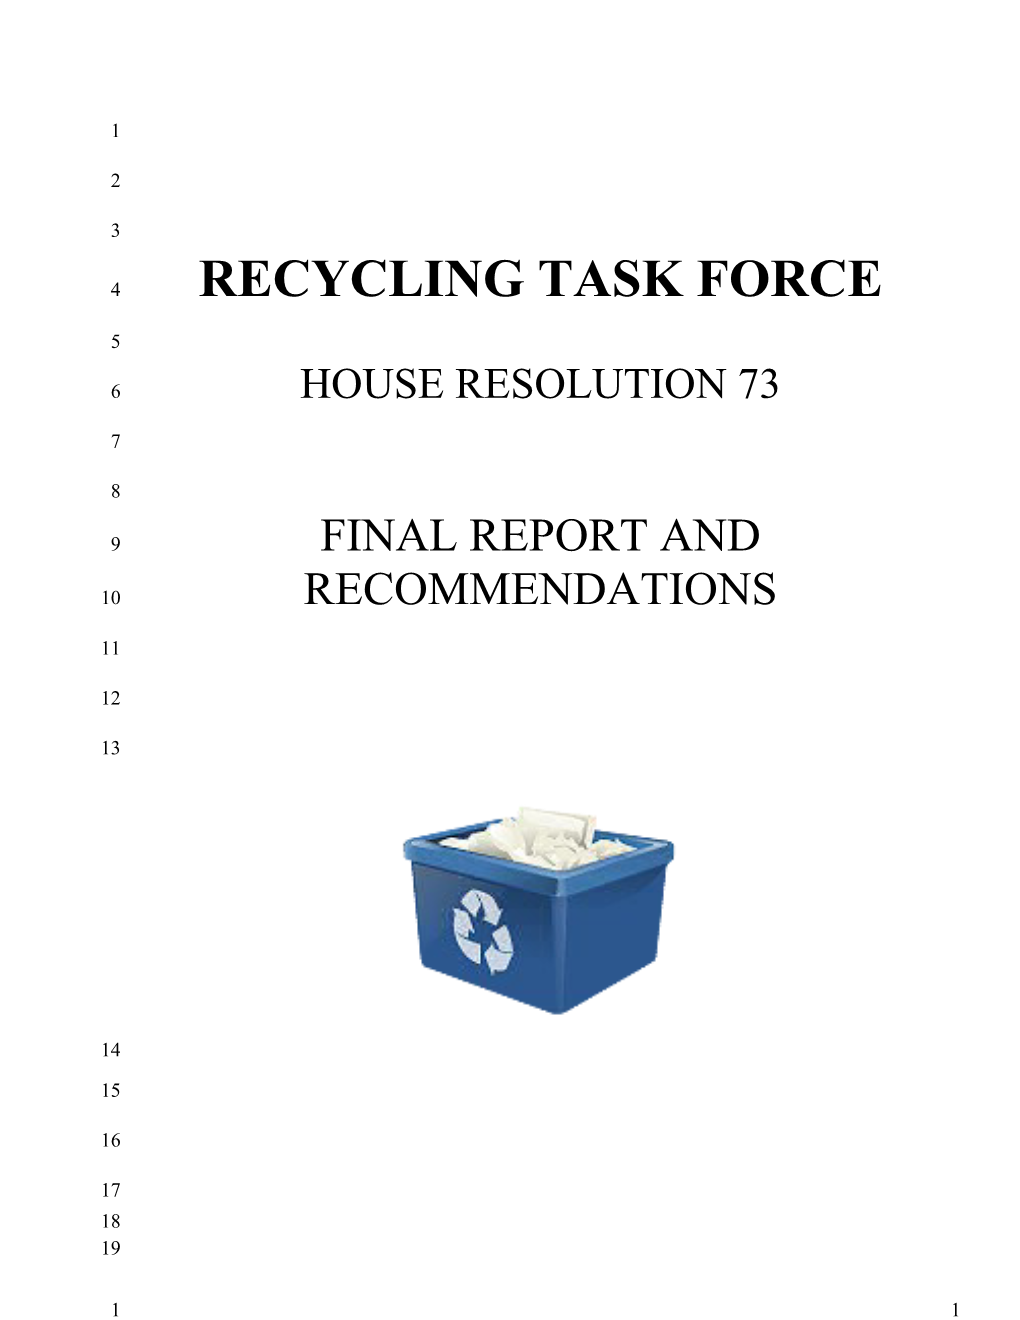 Recycling Task Force